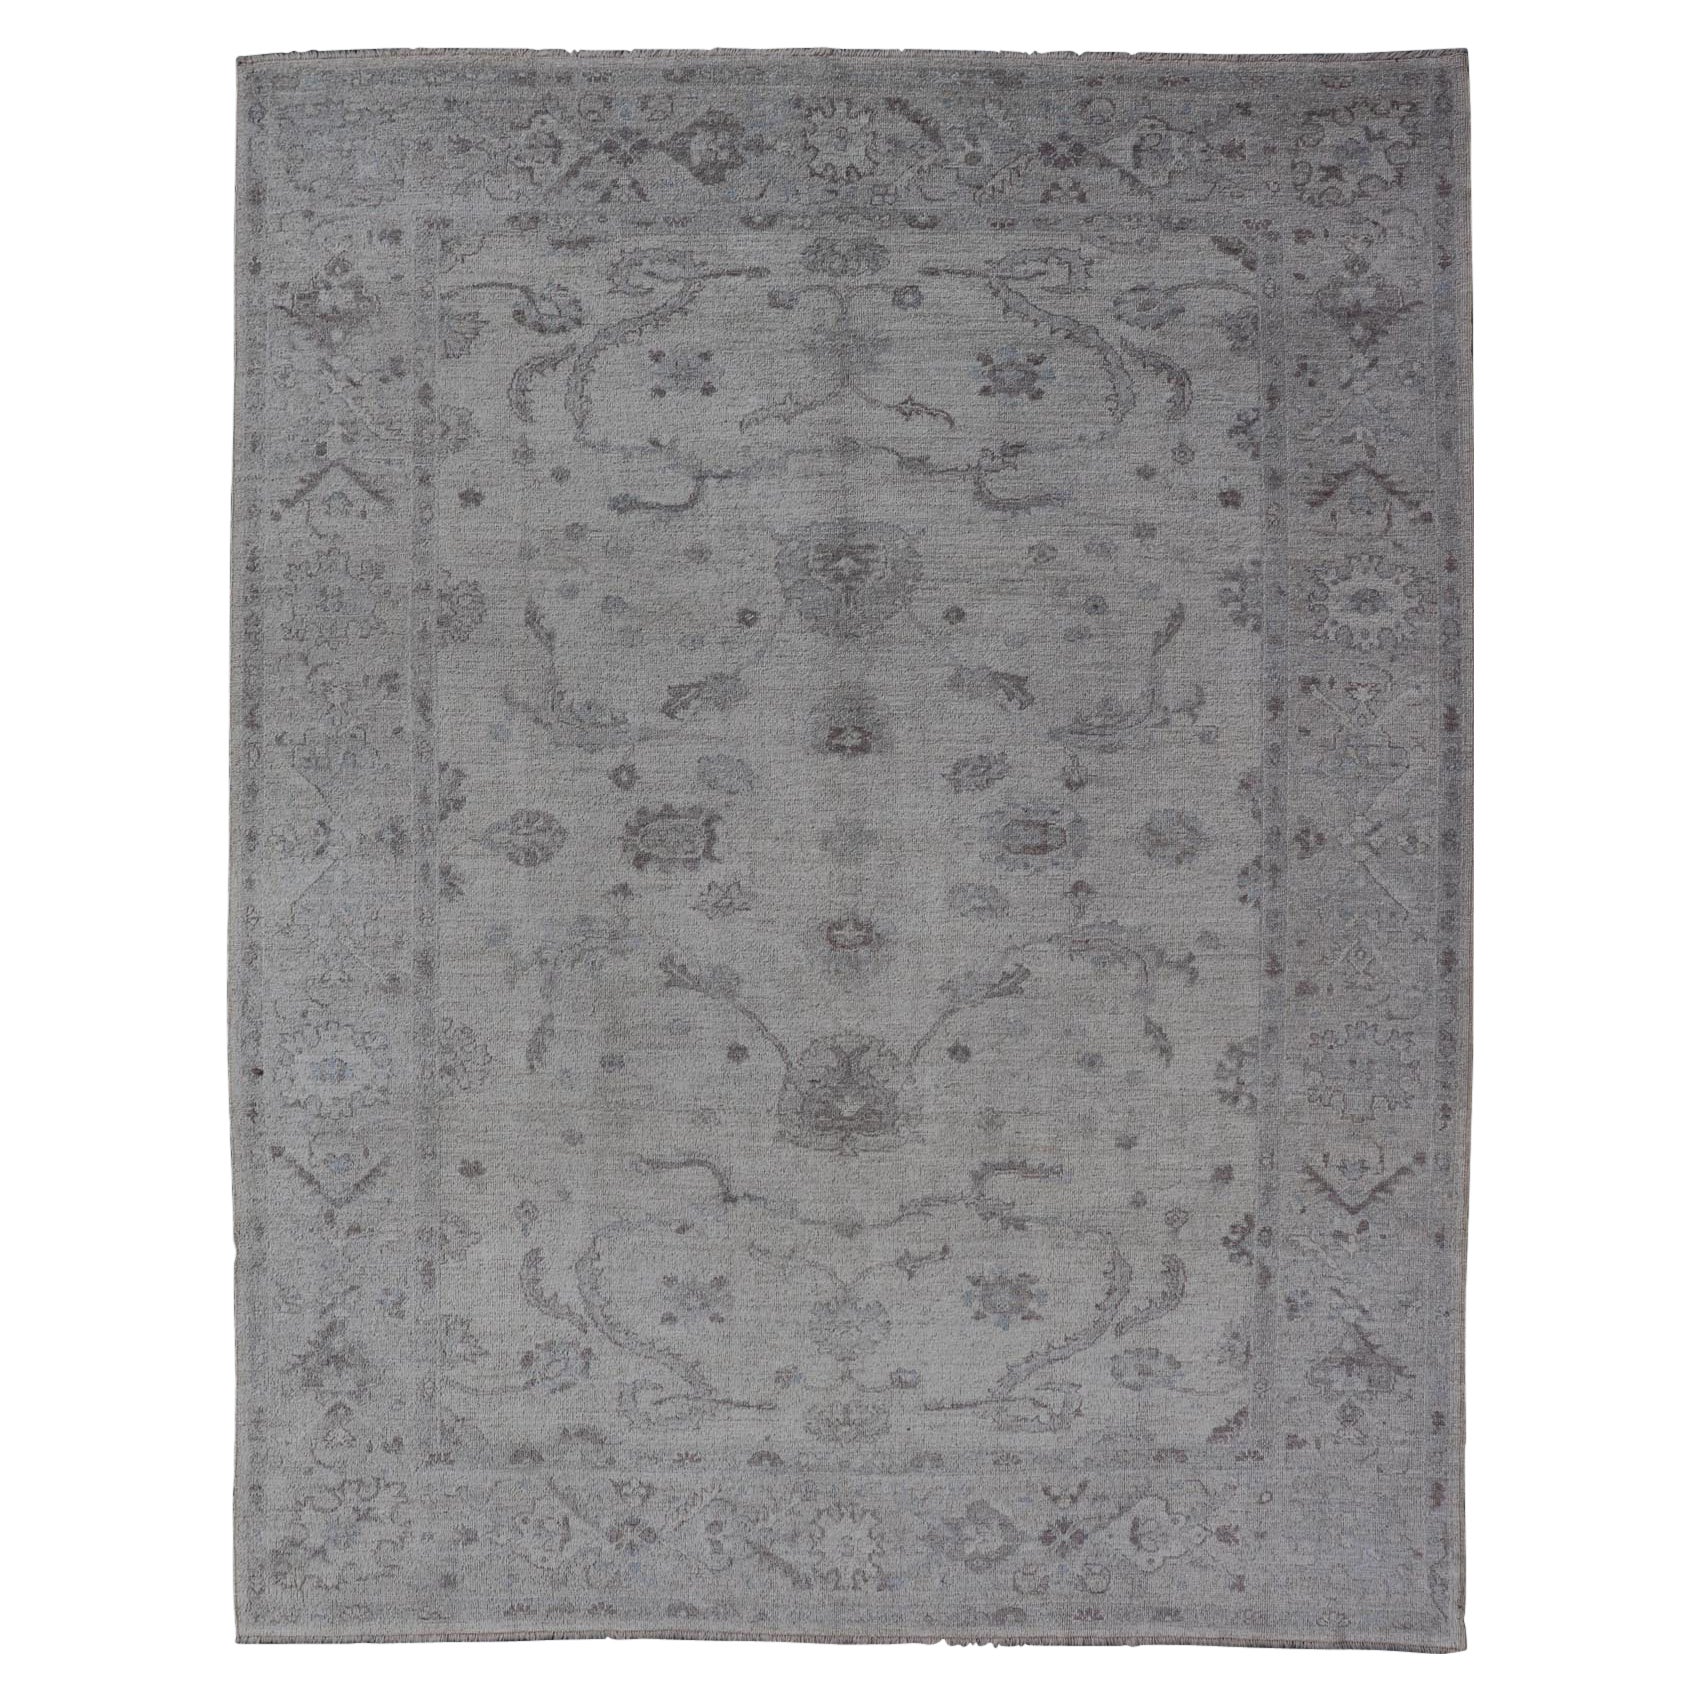 Angora Oushak Turkish Rug in Cream, Taupe, Silver, Light Brown Light Blue Colors For Sale